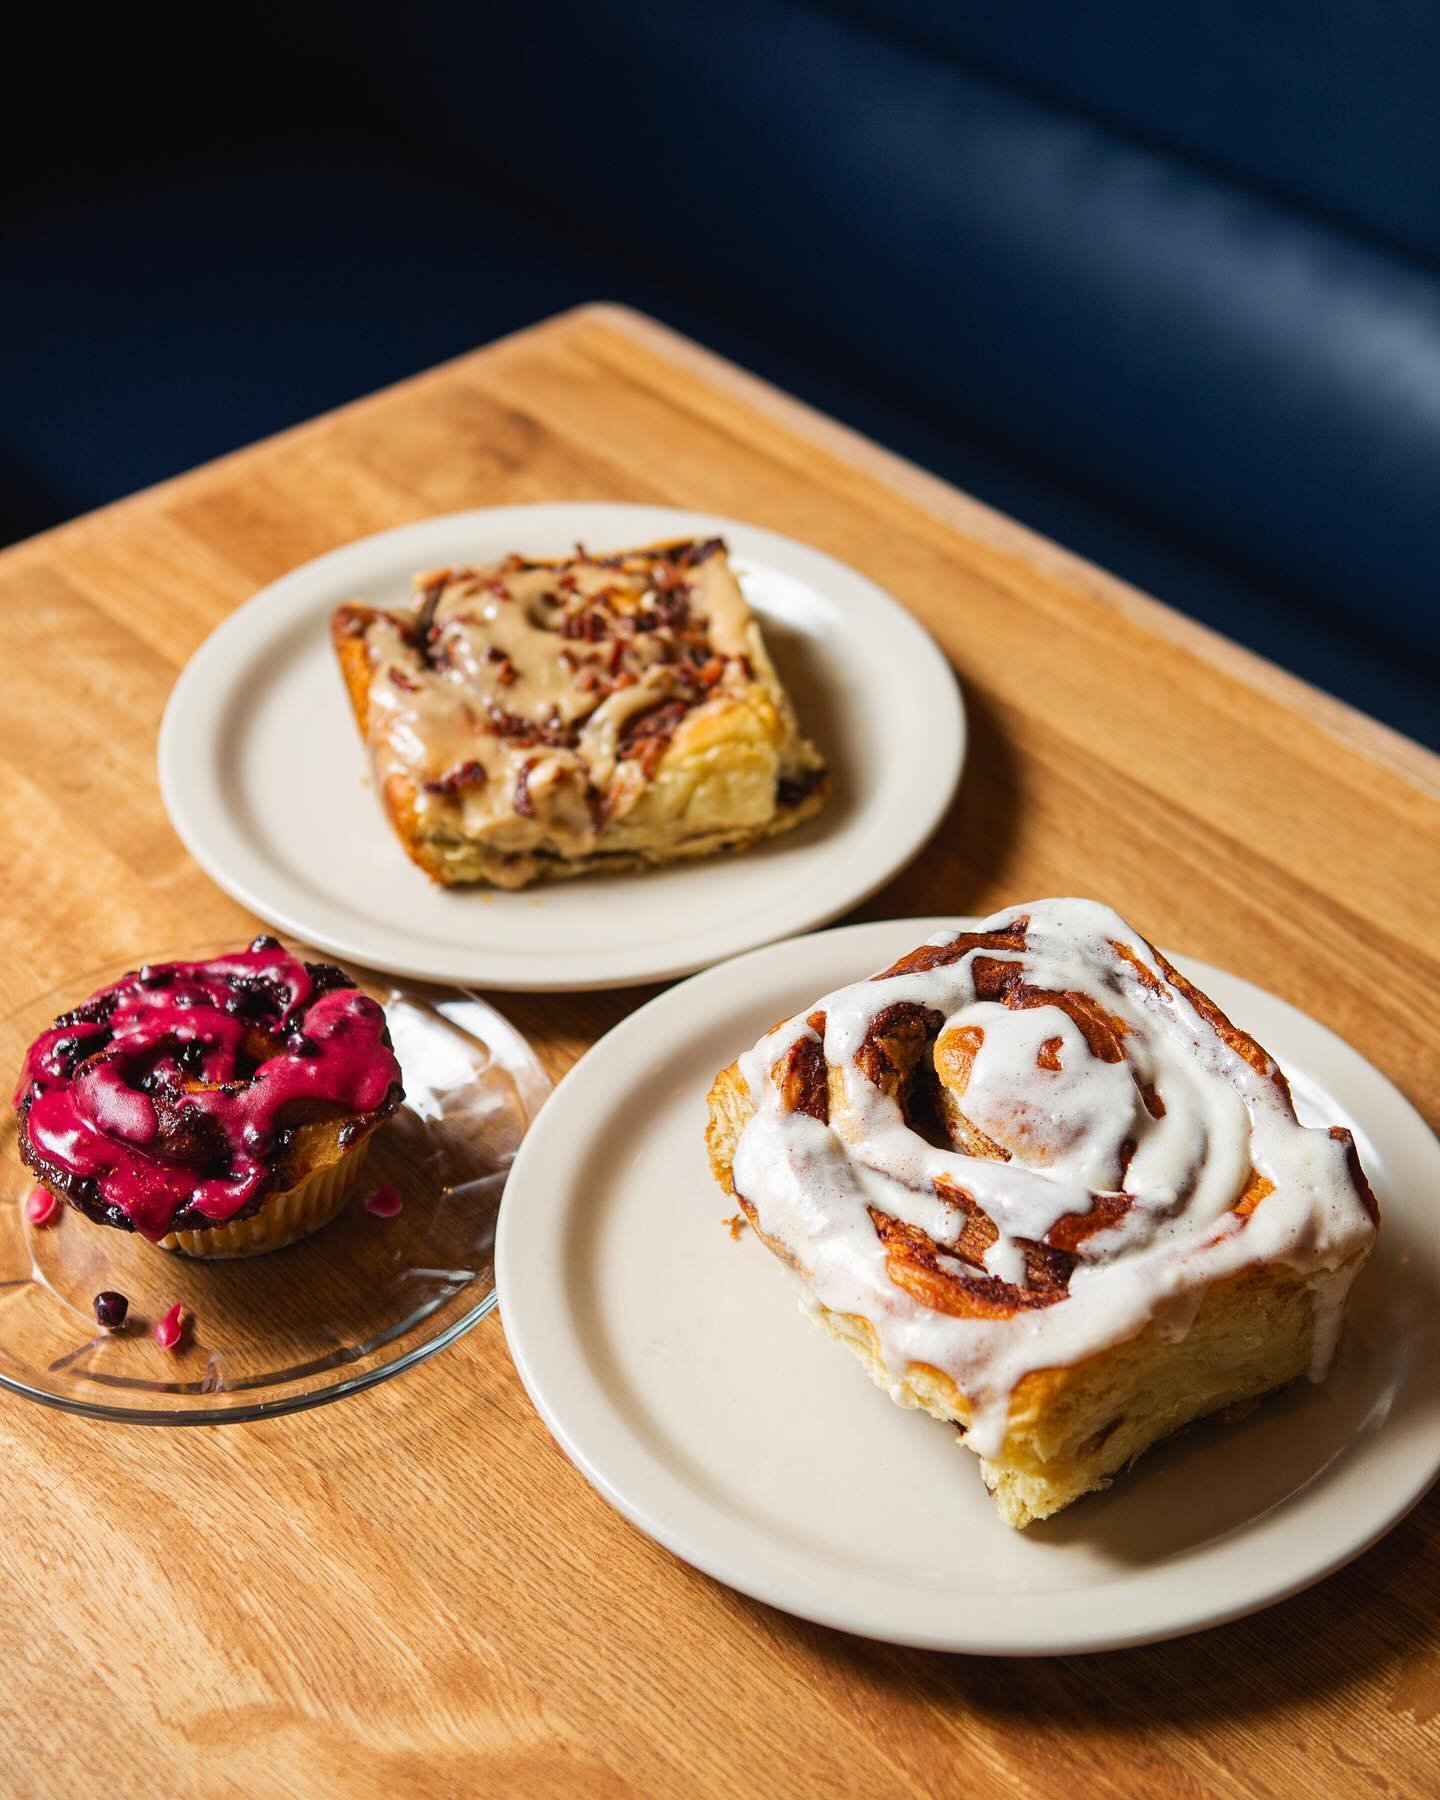 People are loving our new Cinnamon Rolls! We ran out early today. Be sure to get in early to get them fresh. We&rsquo;re busy baking more!

#cinnamonrolls #freshbaked #burien #burienfood #imyourhuckleberry